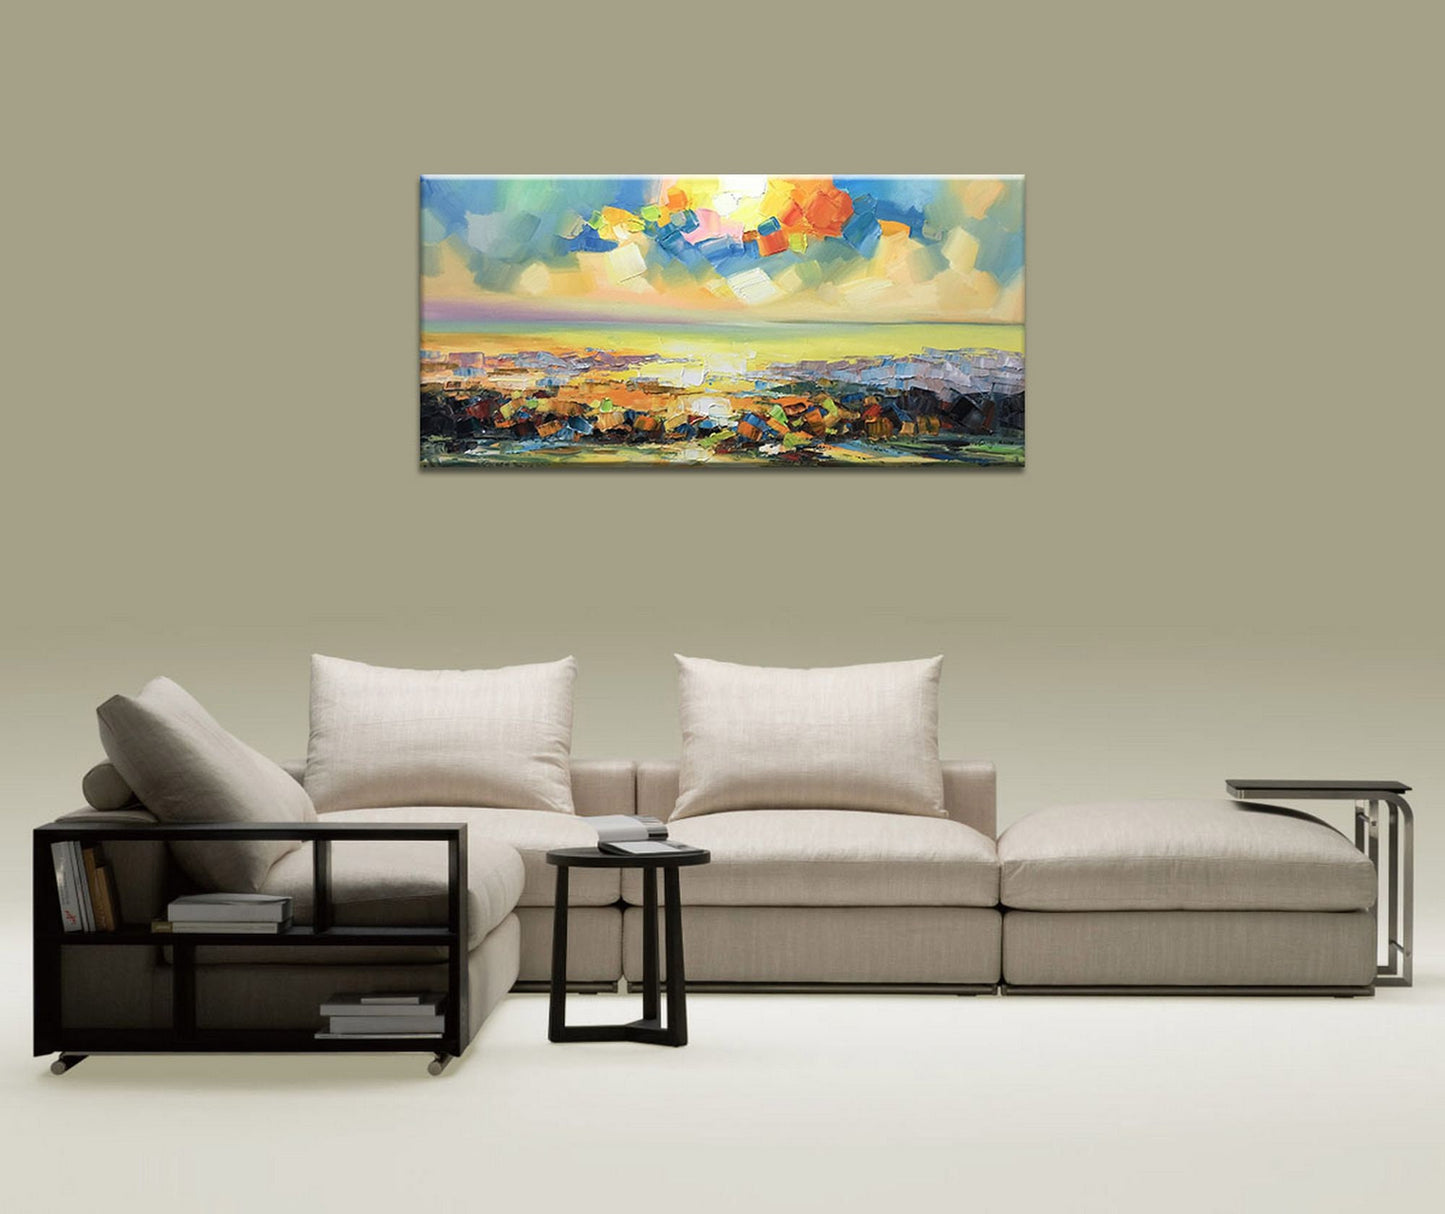 Rustic Living Room Decor, Original Art, Large Landscape Painting, Wall Decor, Large Abstract Painting, Canvas Painting Abstract Oil Painting